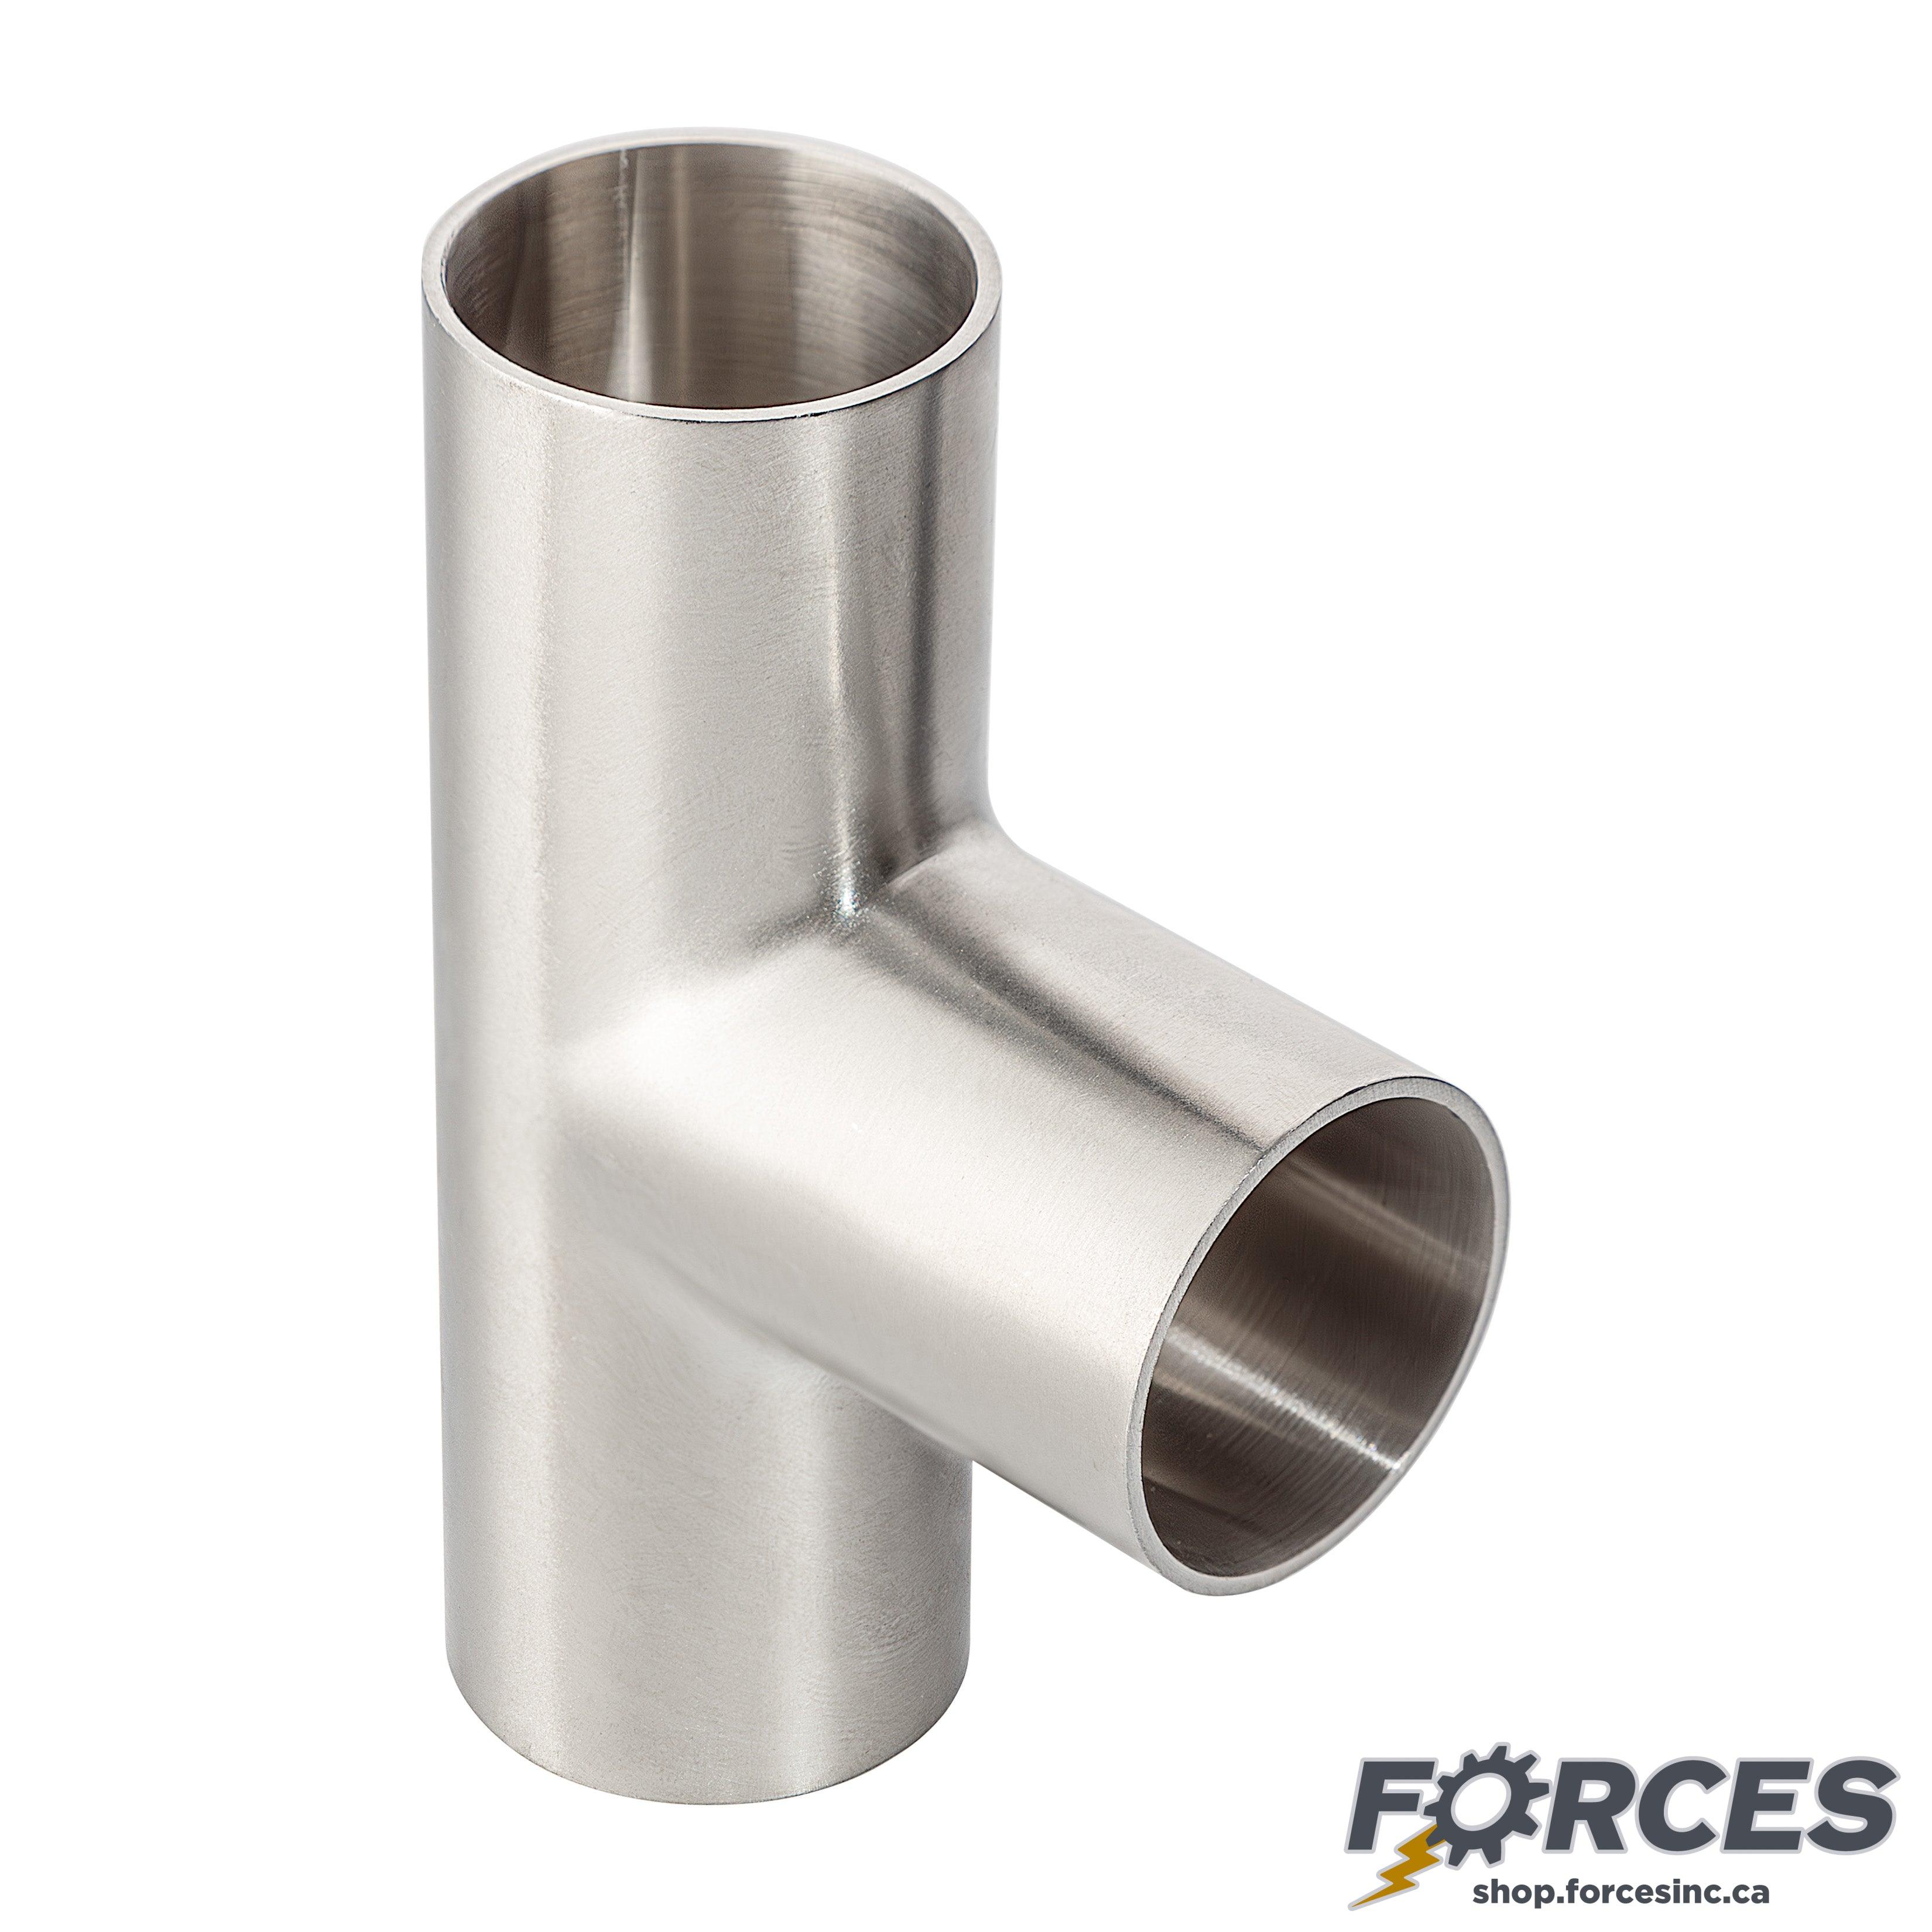 1-1/2" Butt Weld Long Tee - Stainless Steel 316 - Forces Inc